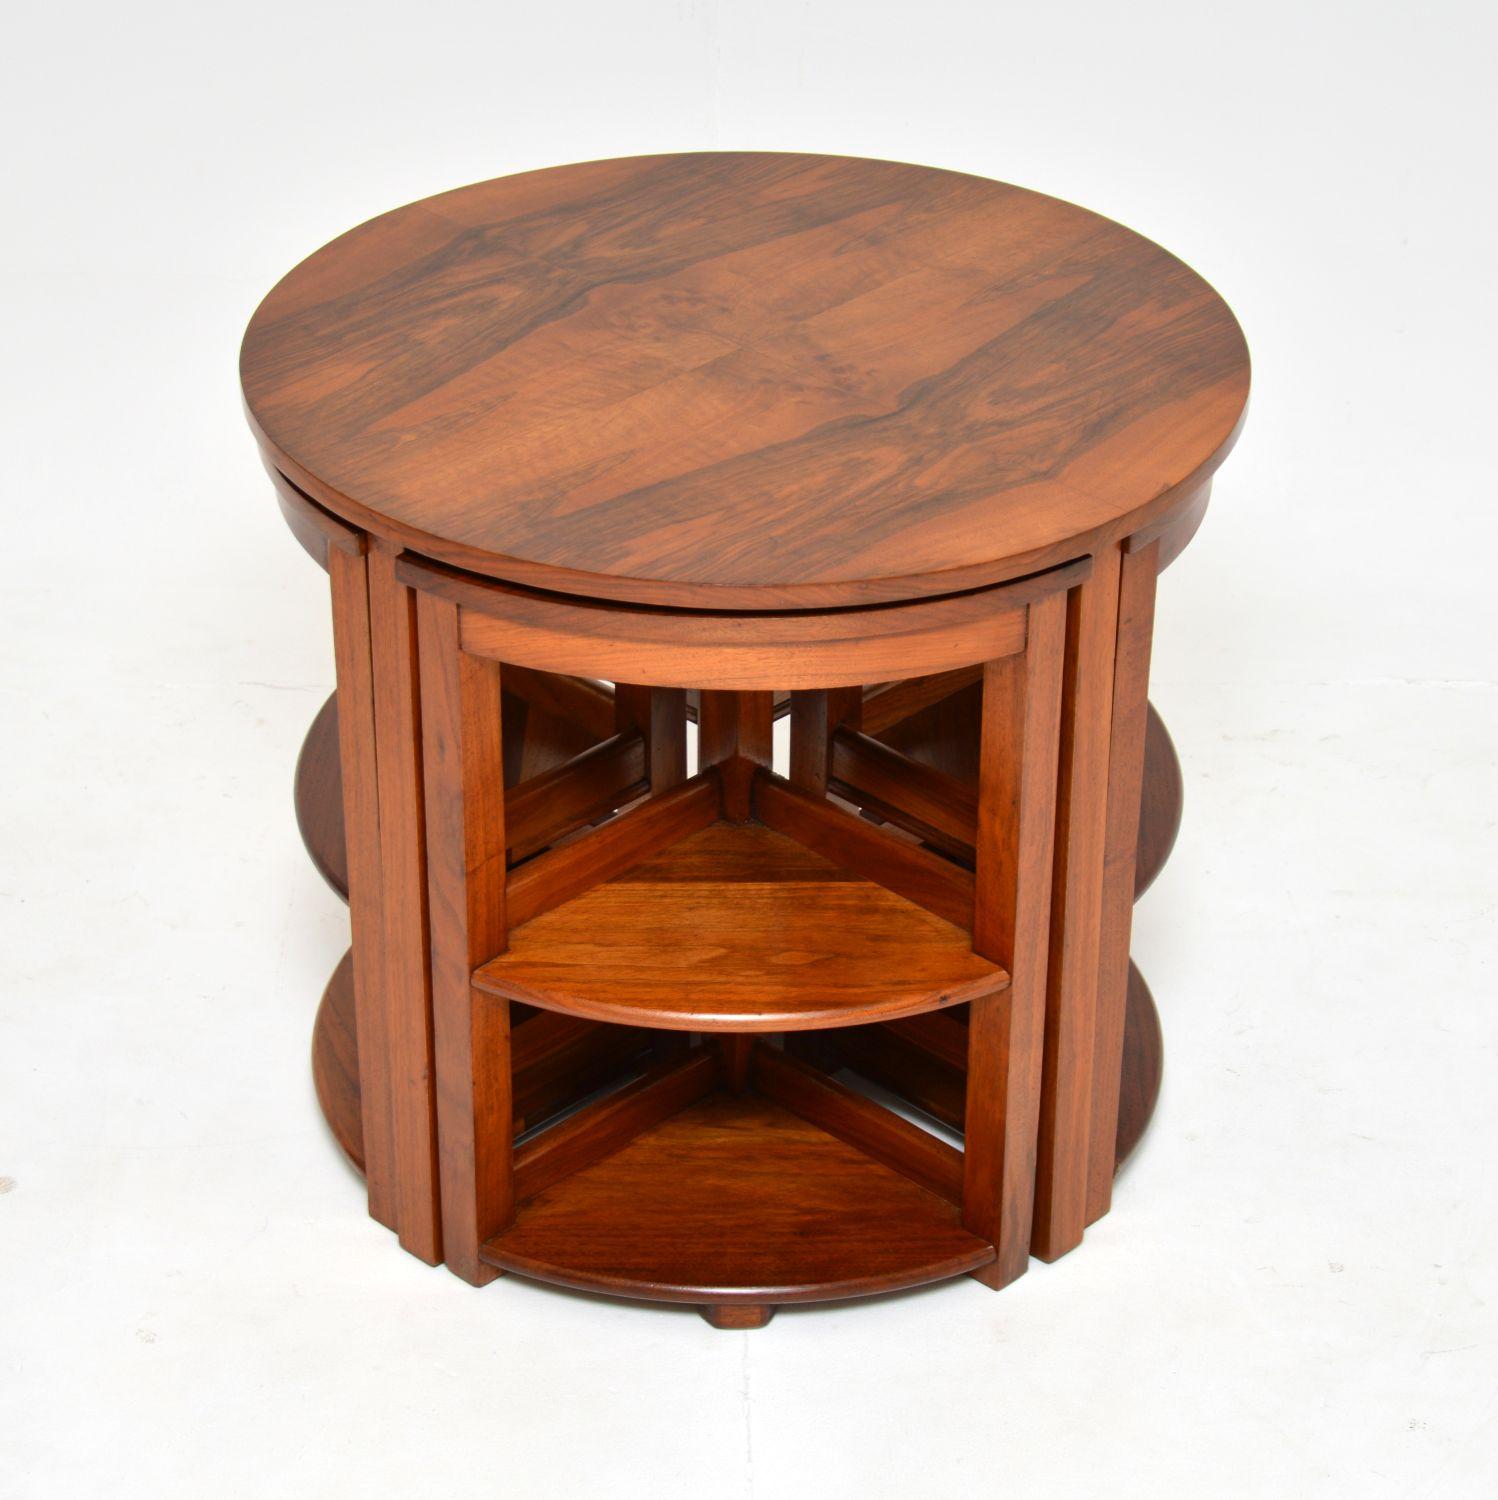 A stylish and extremely well made original Art Deco period nesting coffee table in walnut. This was made in England, it dates from the 1930’s.

The quality is amazing, this has a gorgeous design and is very practical. The four smaller pie shaped